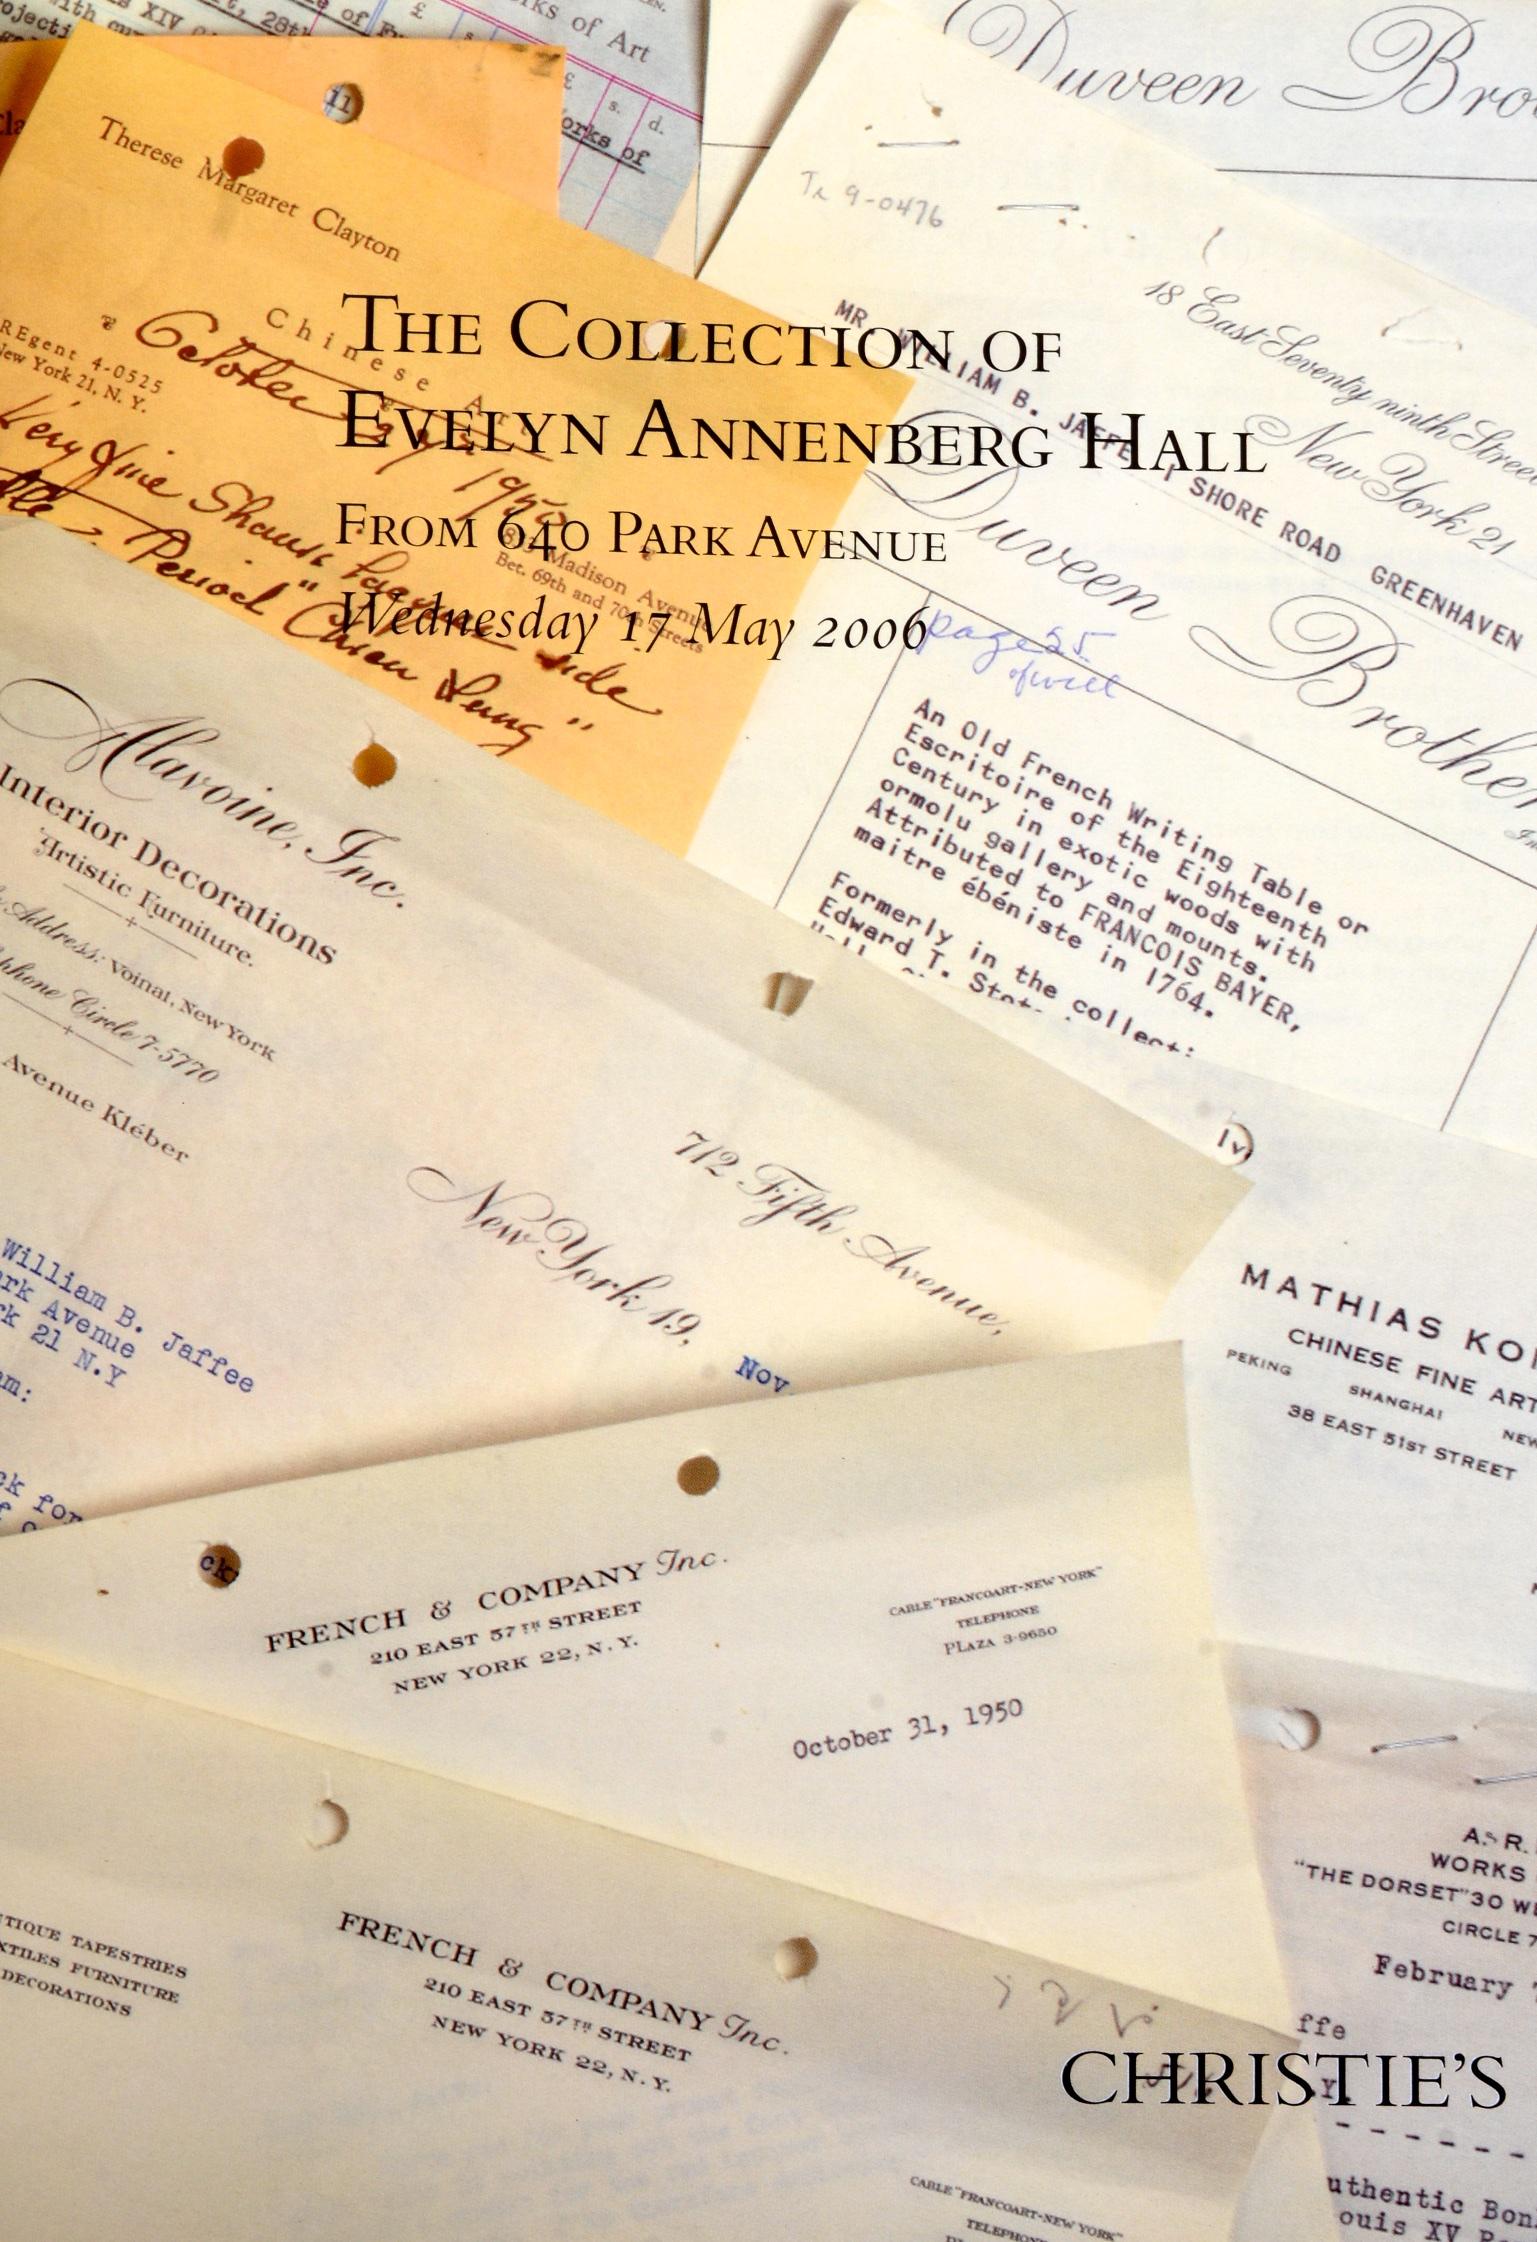 Collection of Evelyn Annenberg Hall, 640 Park Ave Christie's, NY, 2006, 1st Ed 14